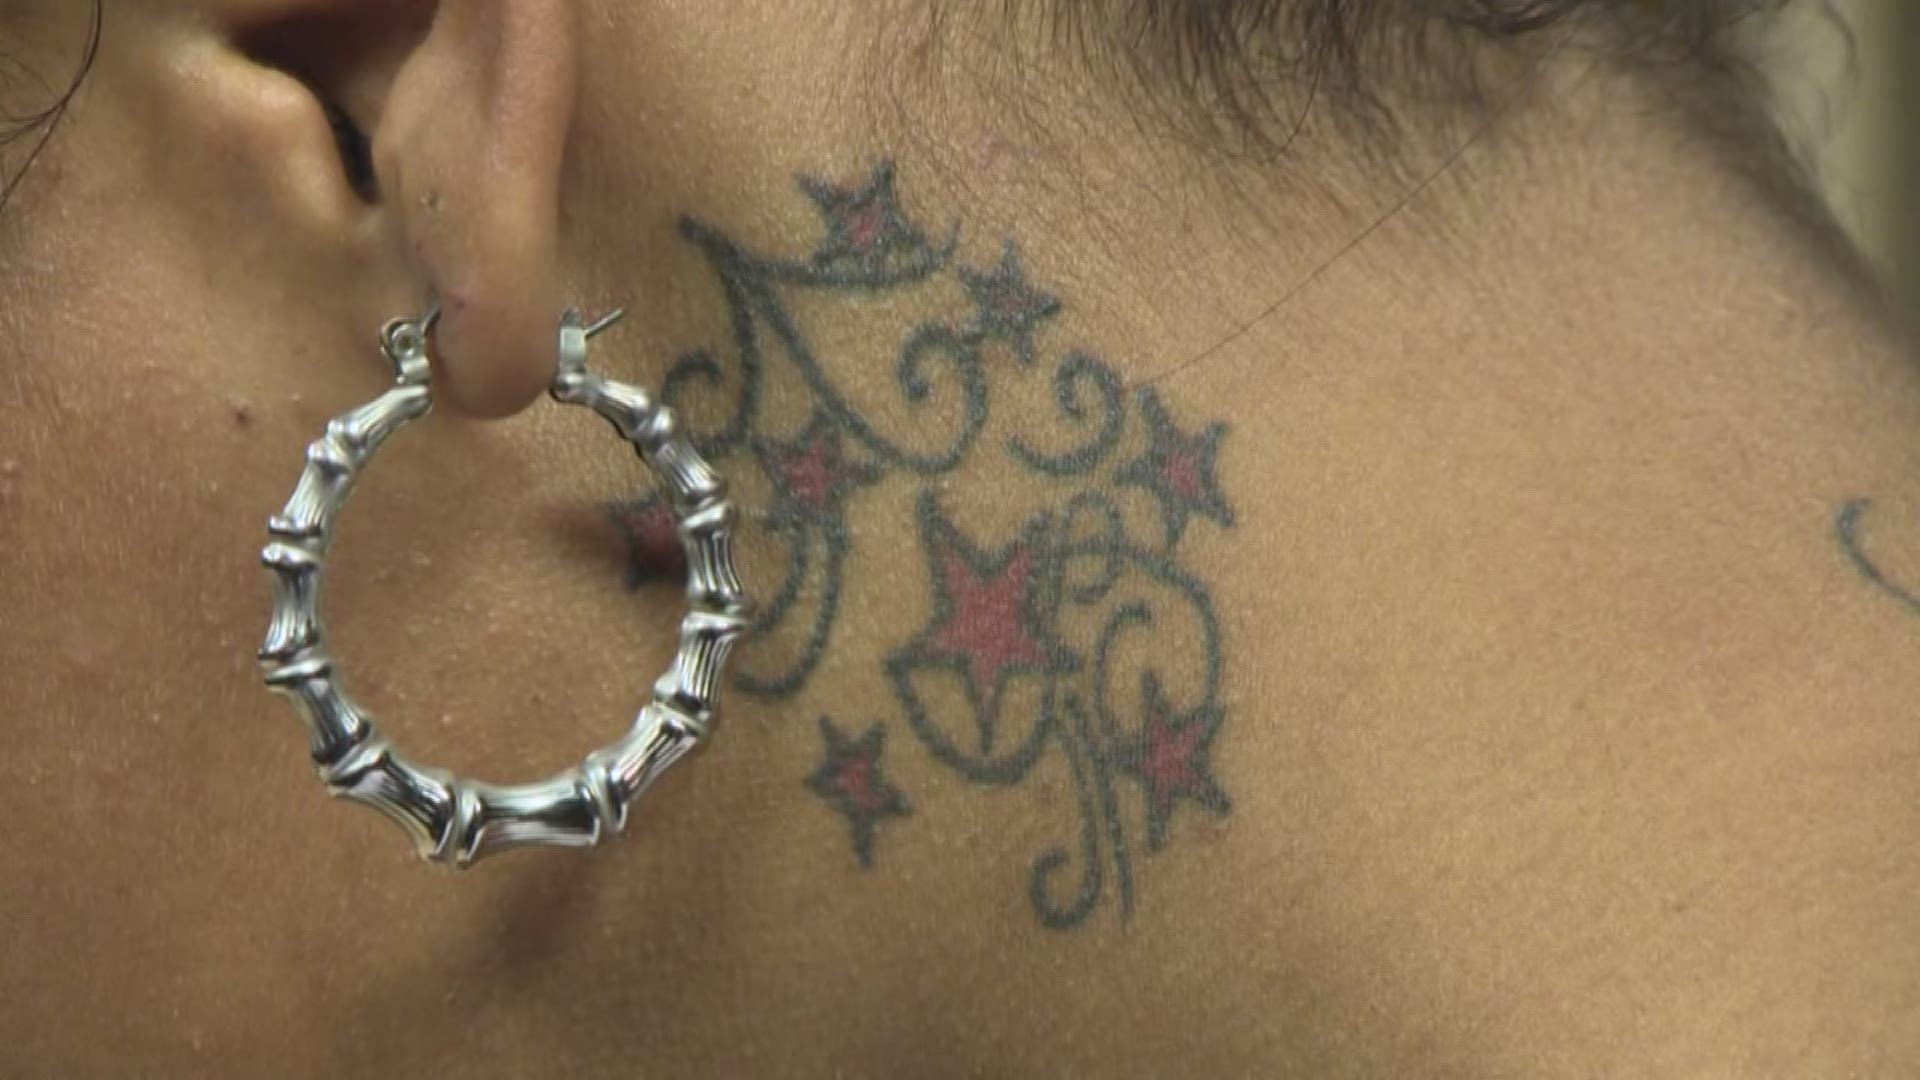 Consumer Reports looked into the best tattoo removal methods available.